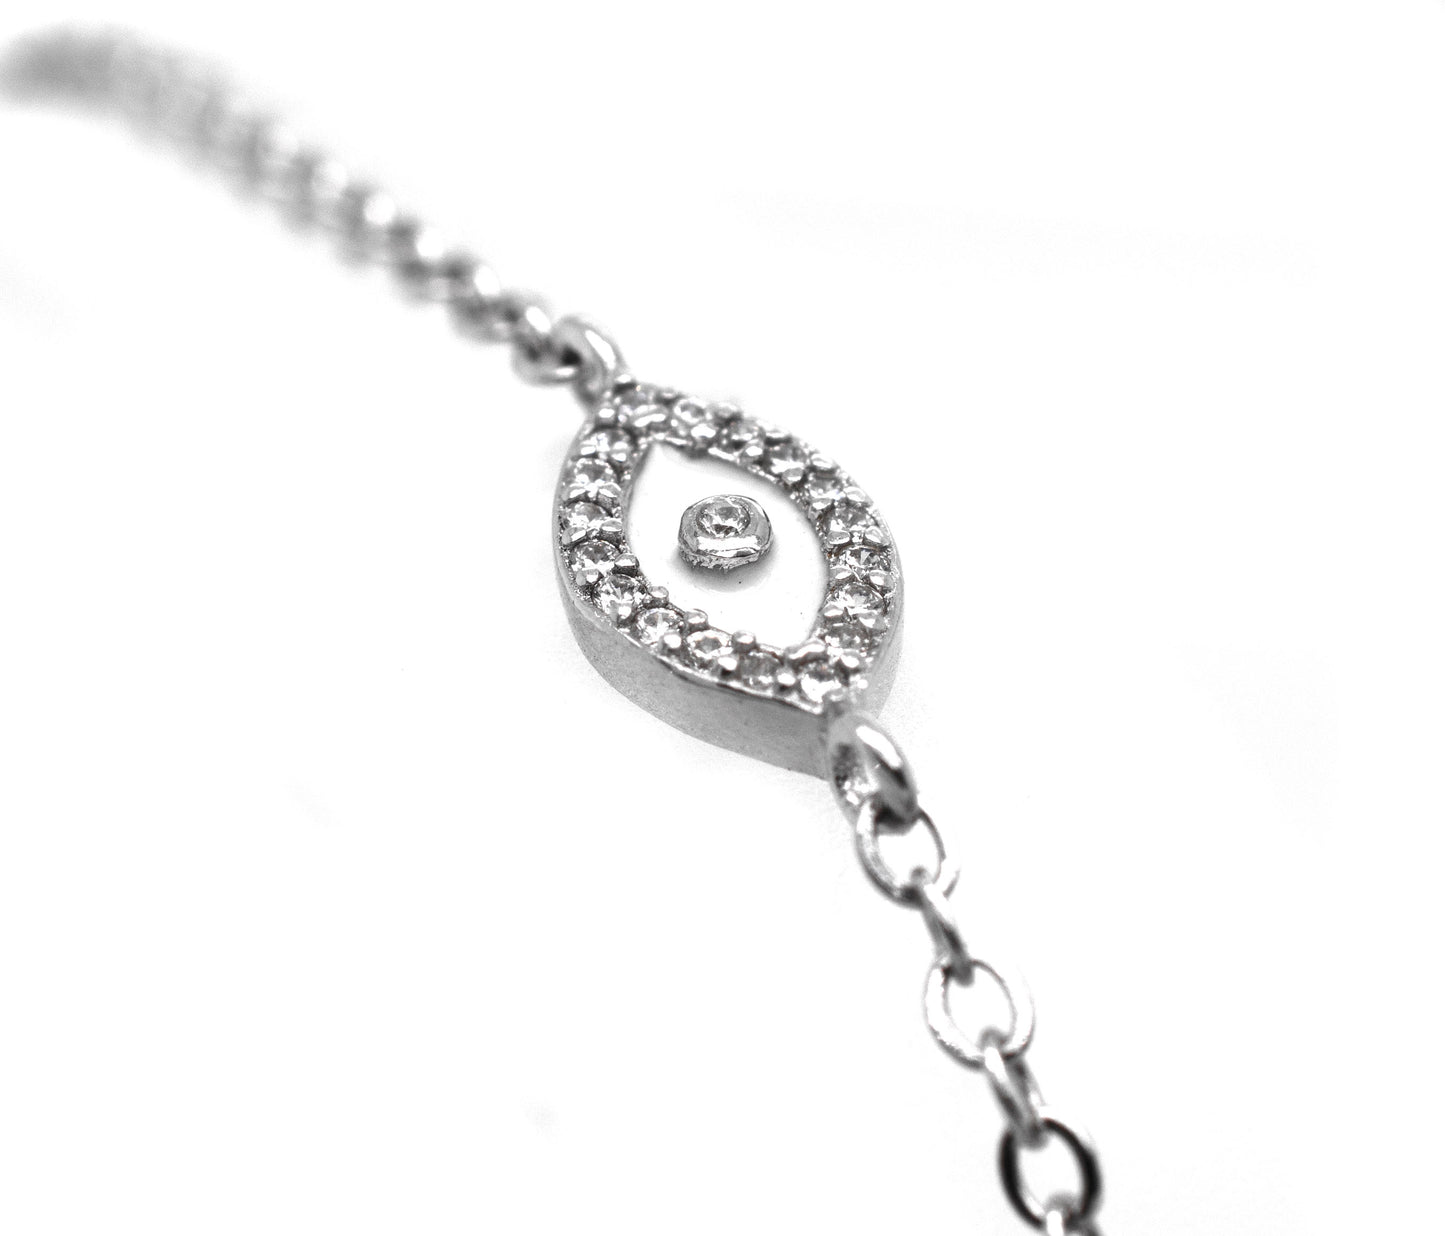 A Trendy Pave Cubic Zirconia Evil Eye Bracelet with a silver protective amulet adorned with cubic zirconia stones.